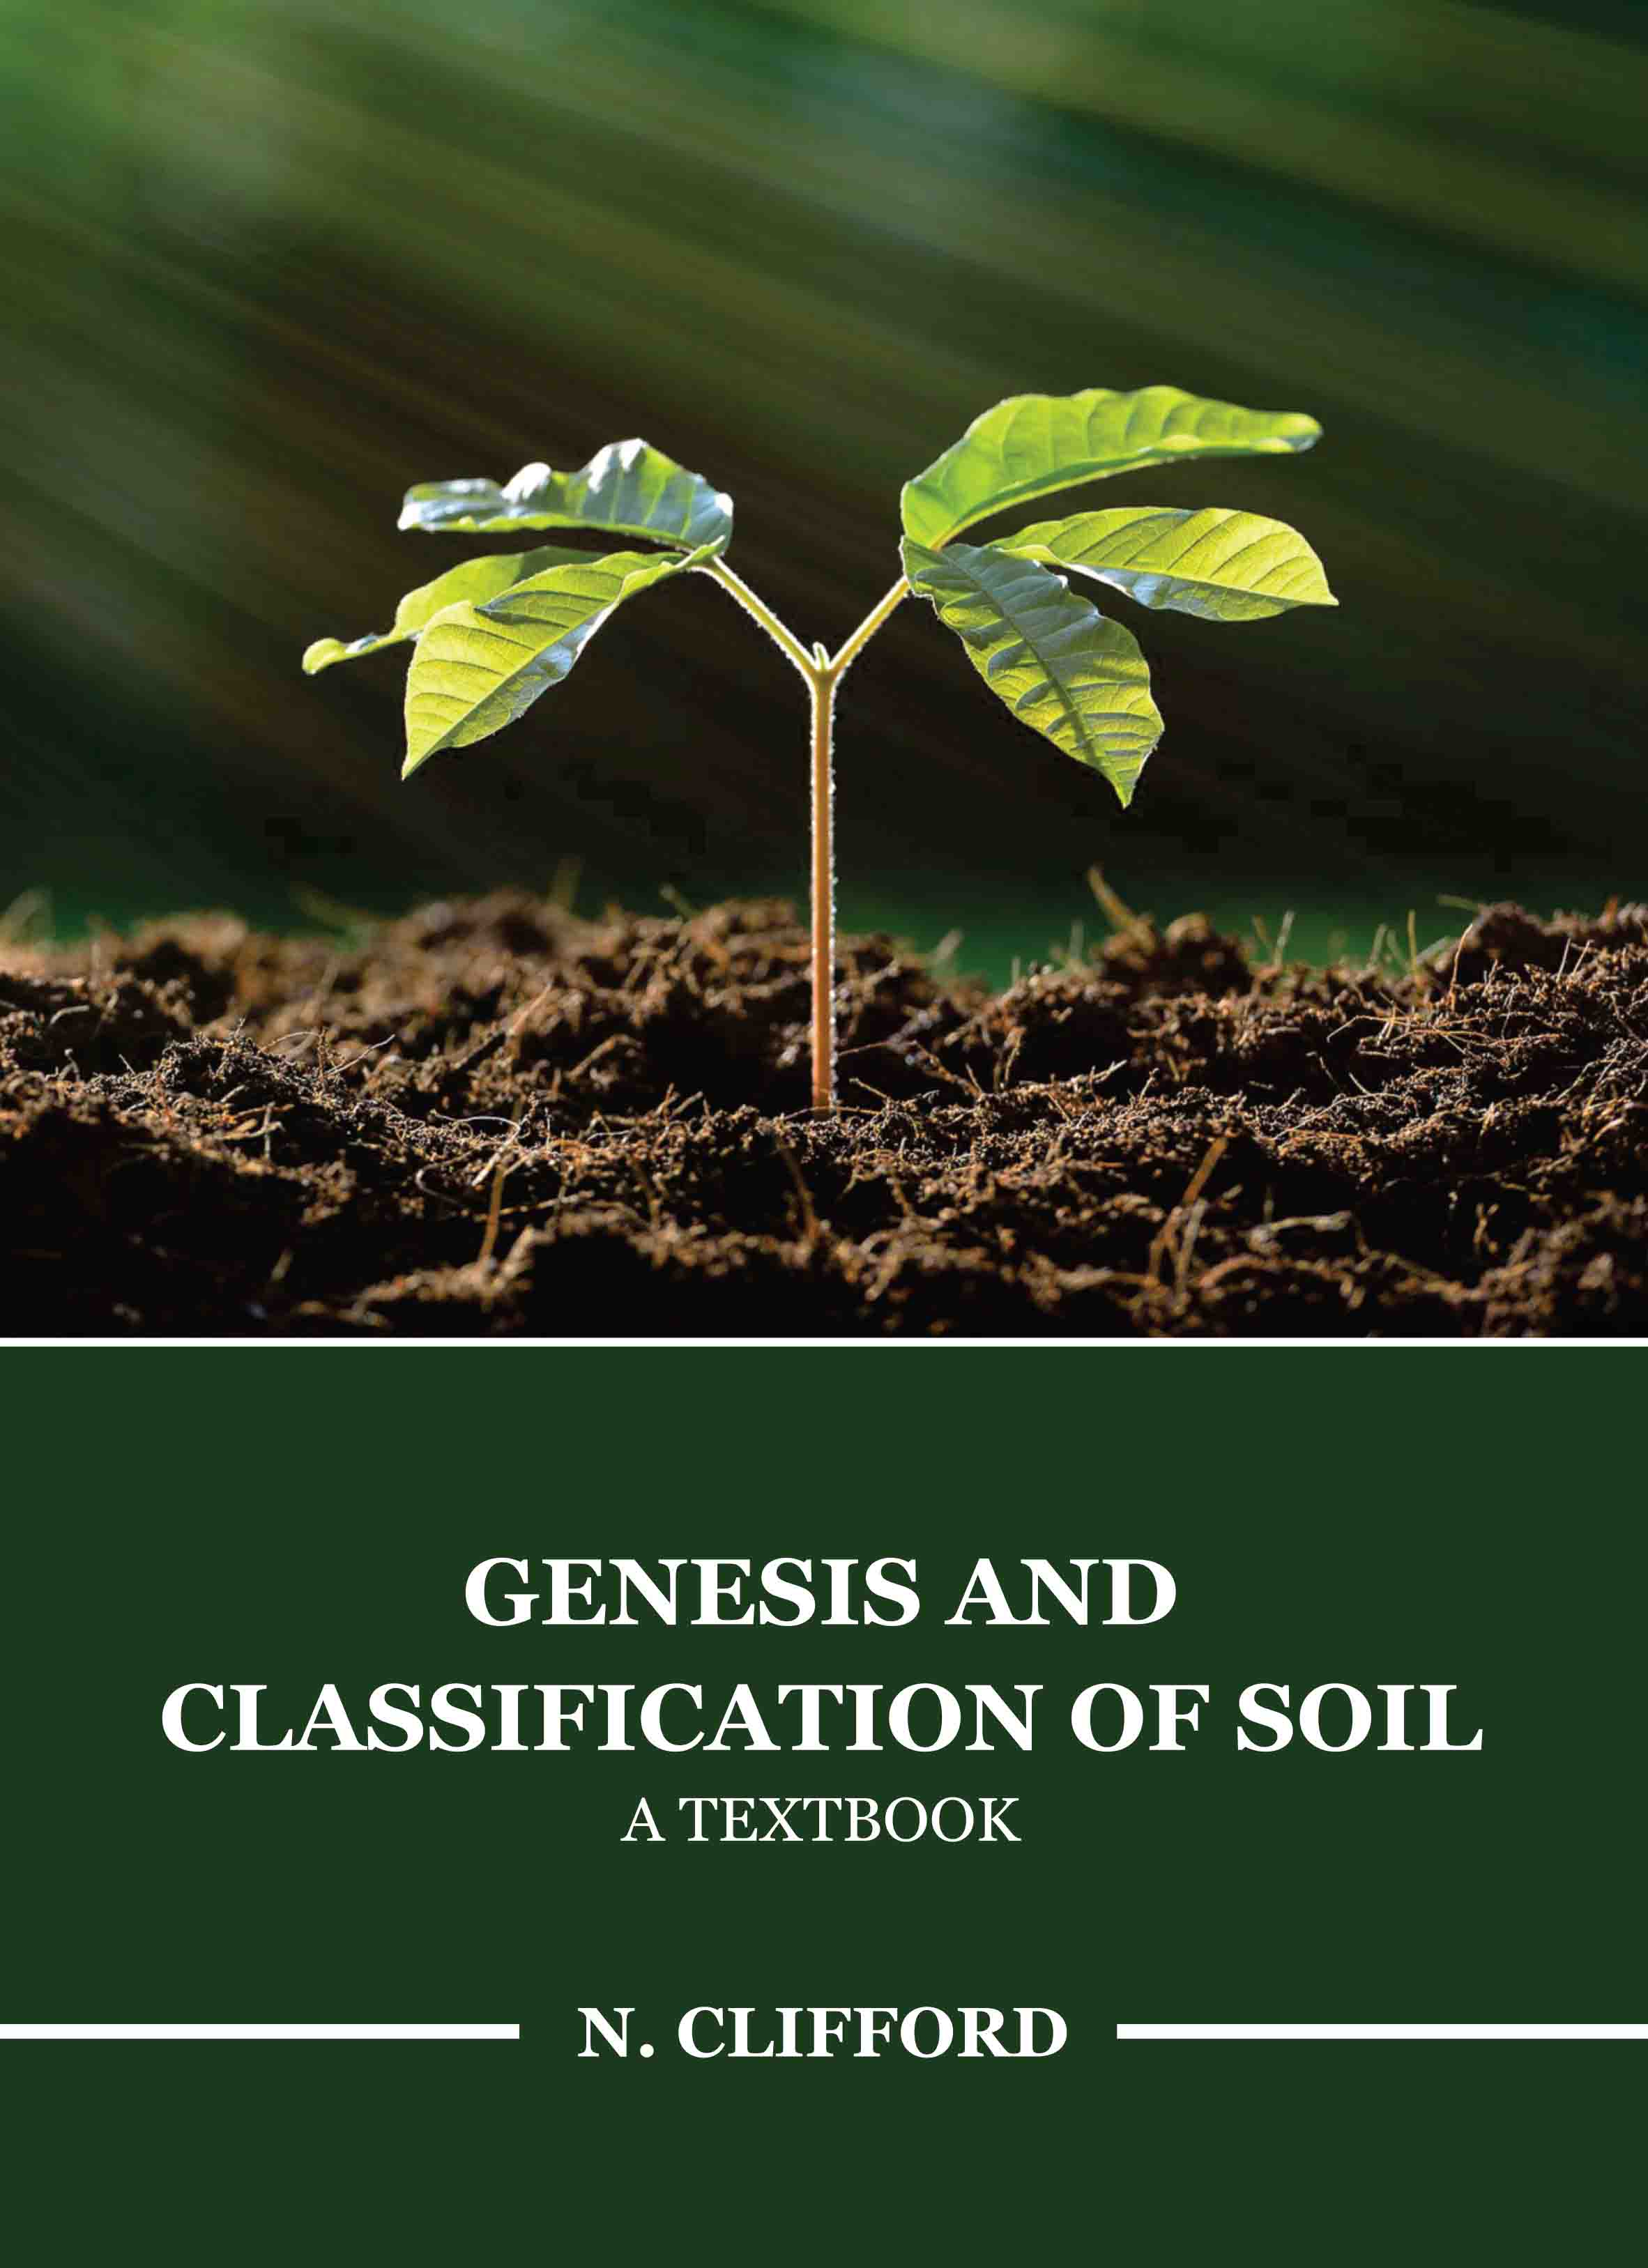 Genesis and Classification of Soil: A Textbook